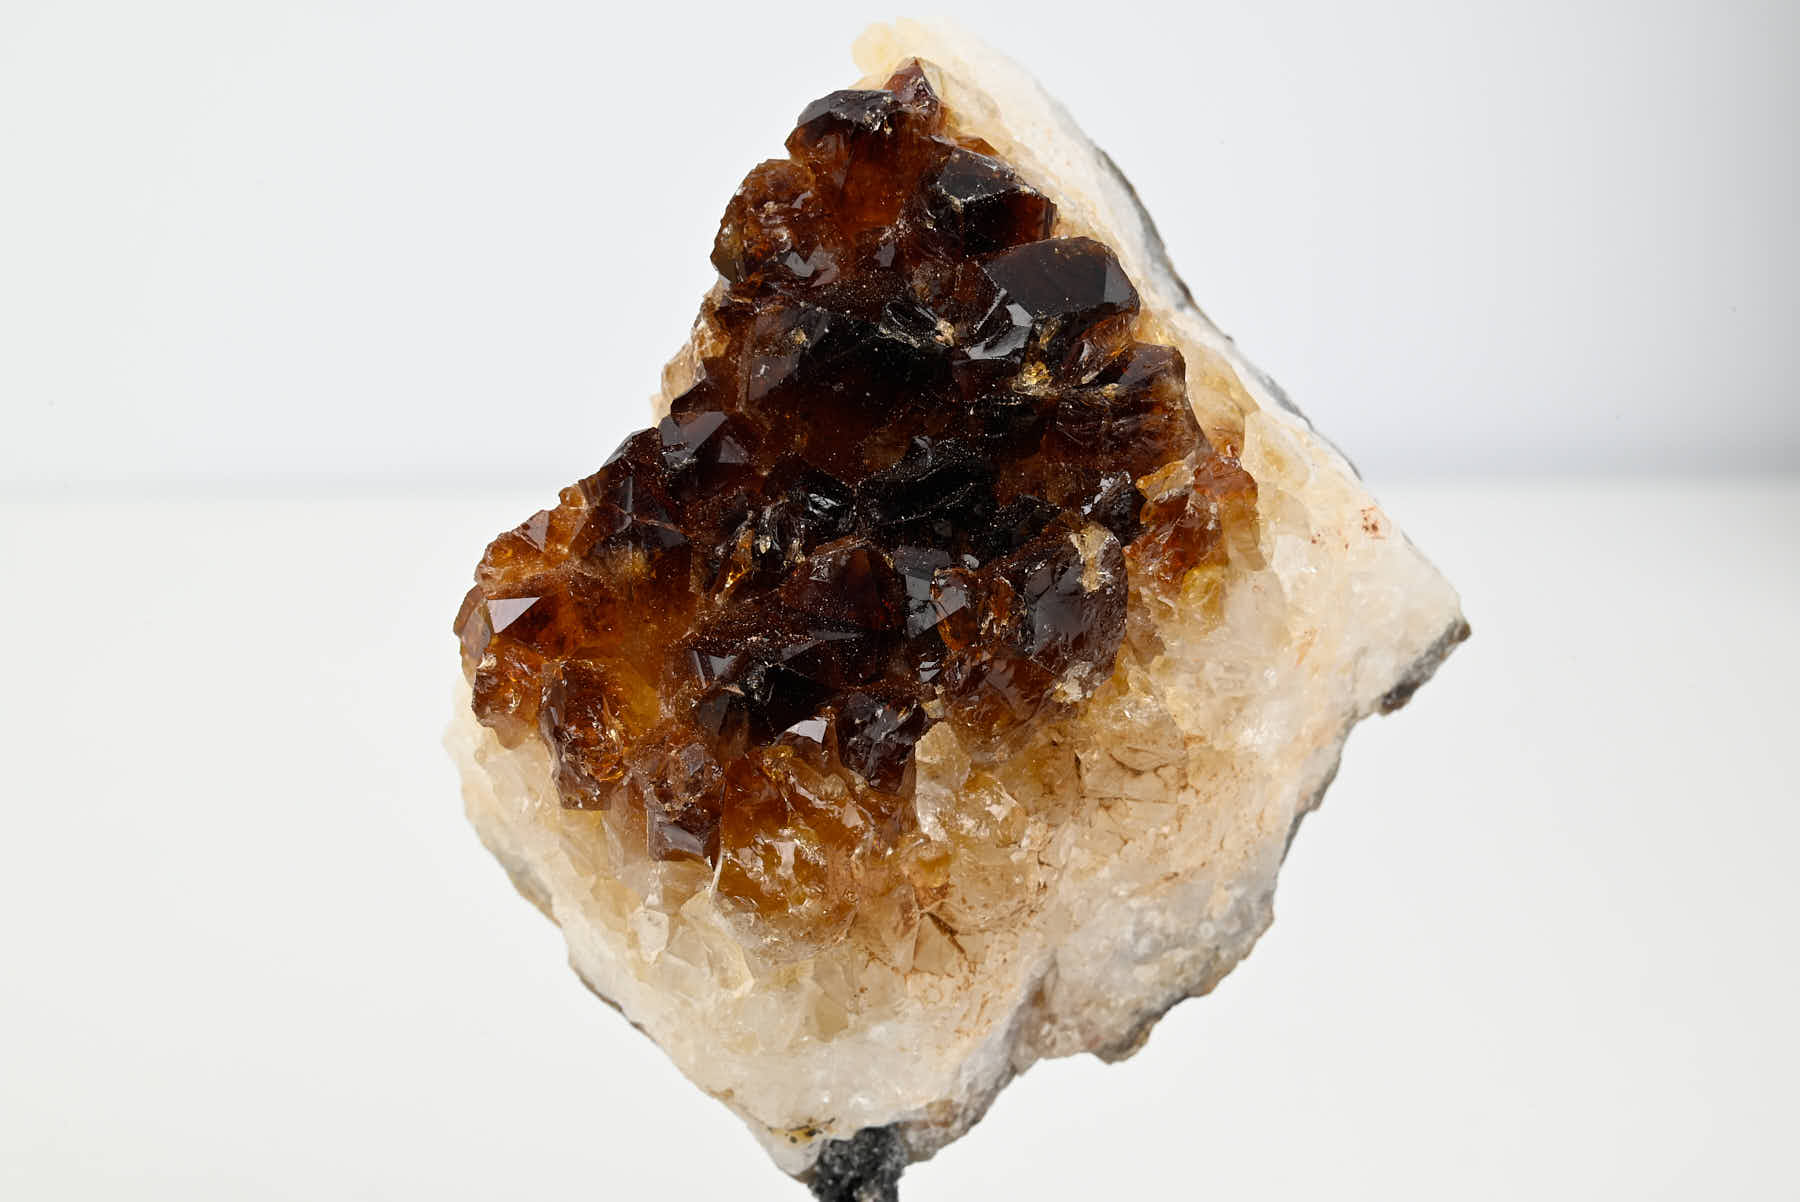 Extra Quality Citrine Cluster on Stand - Small 15cm Tall - #CLUSCI-63021